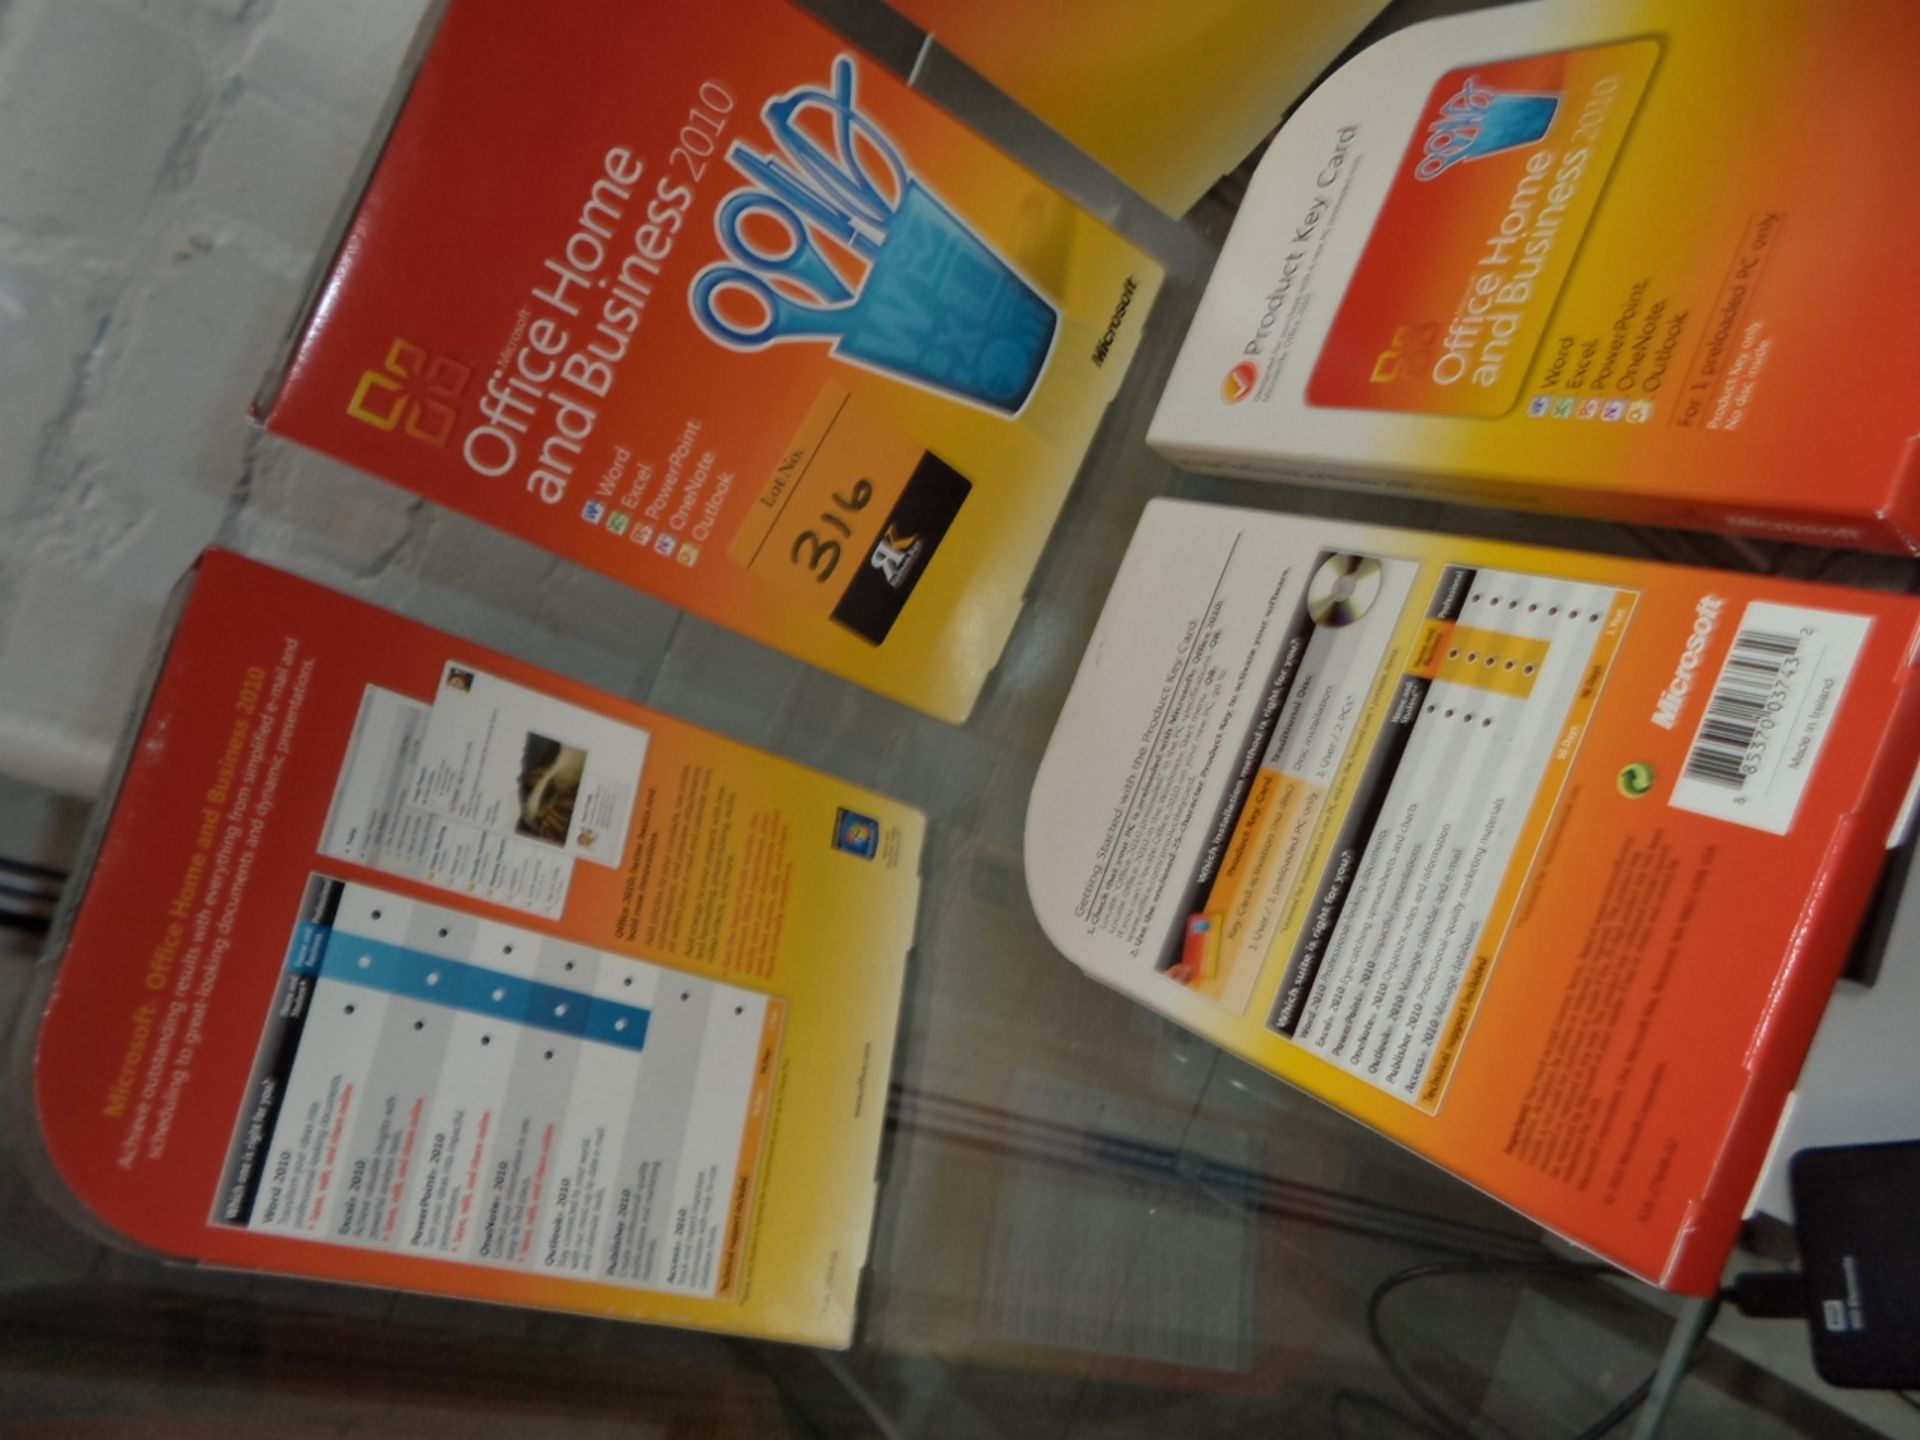 5 off Microsoft Office Home & Business 2010 software packs, 3 of which consist of larger boxes which - Image 4 of 4